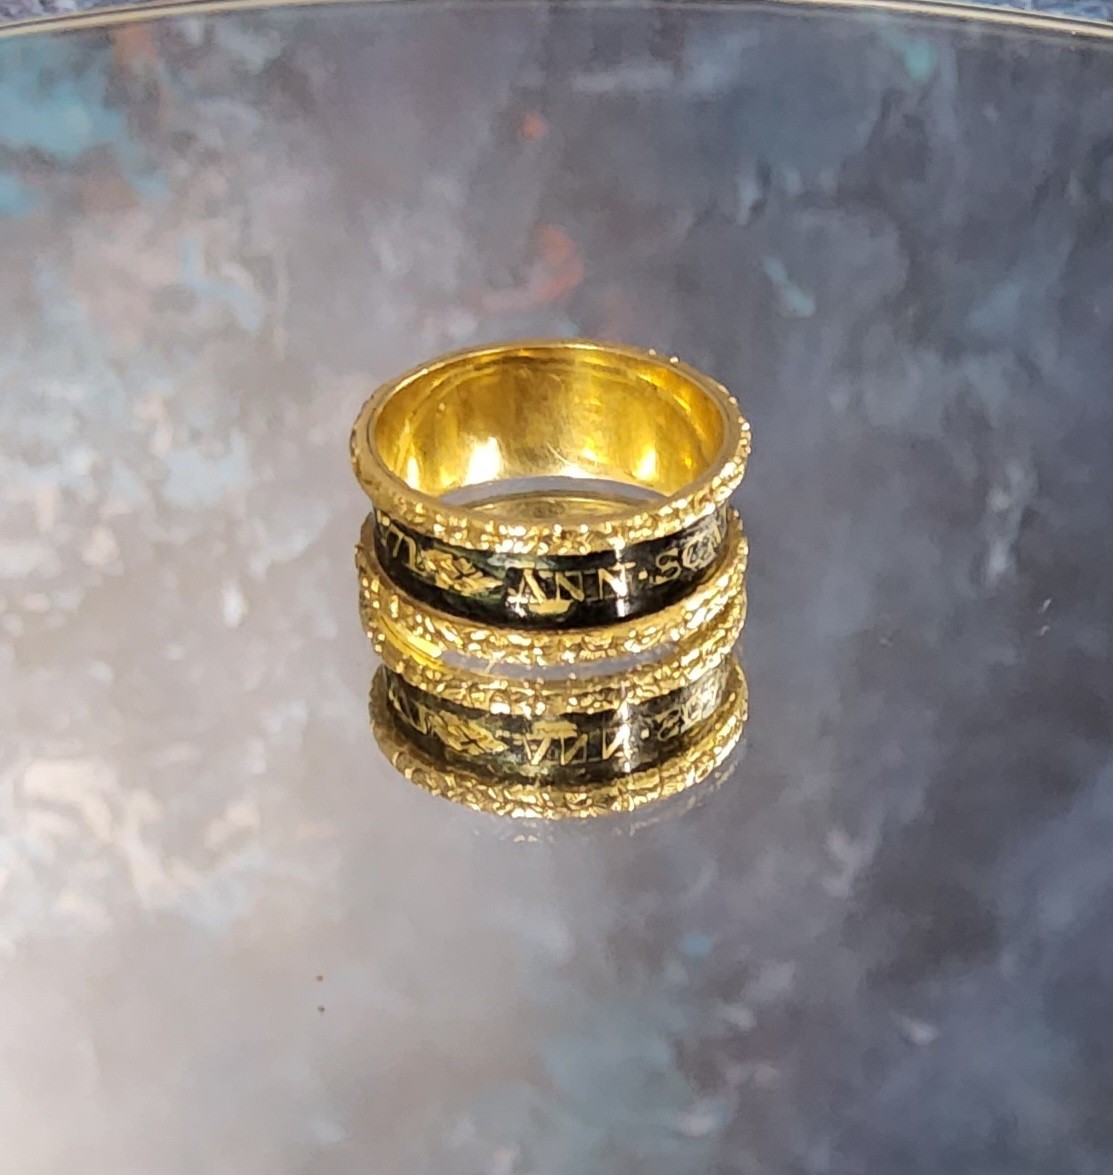 A George IV 18ct mourning ring, a 8mm wide the gold band with recessed black enamel centre with - Image 2 of 2